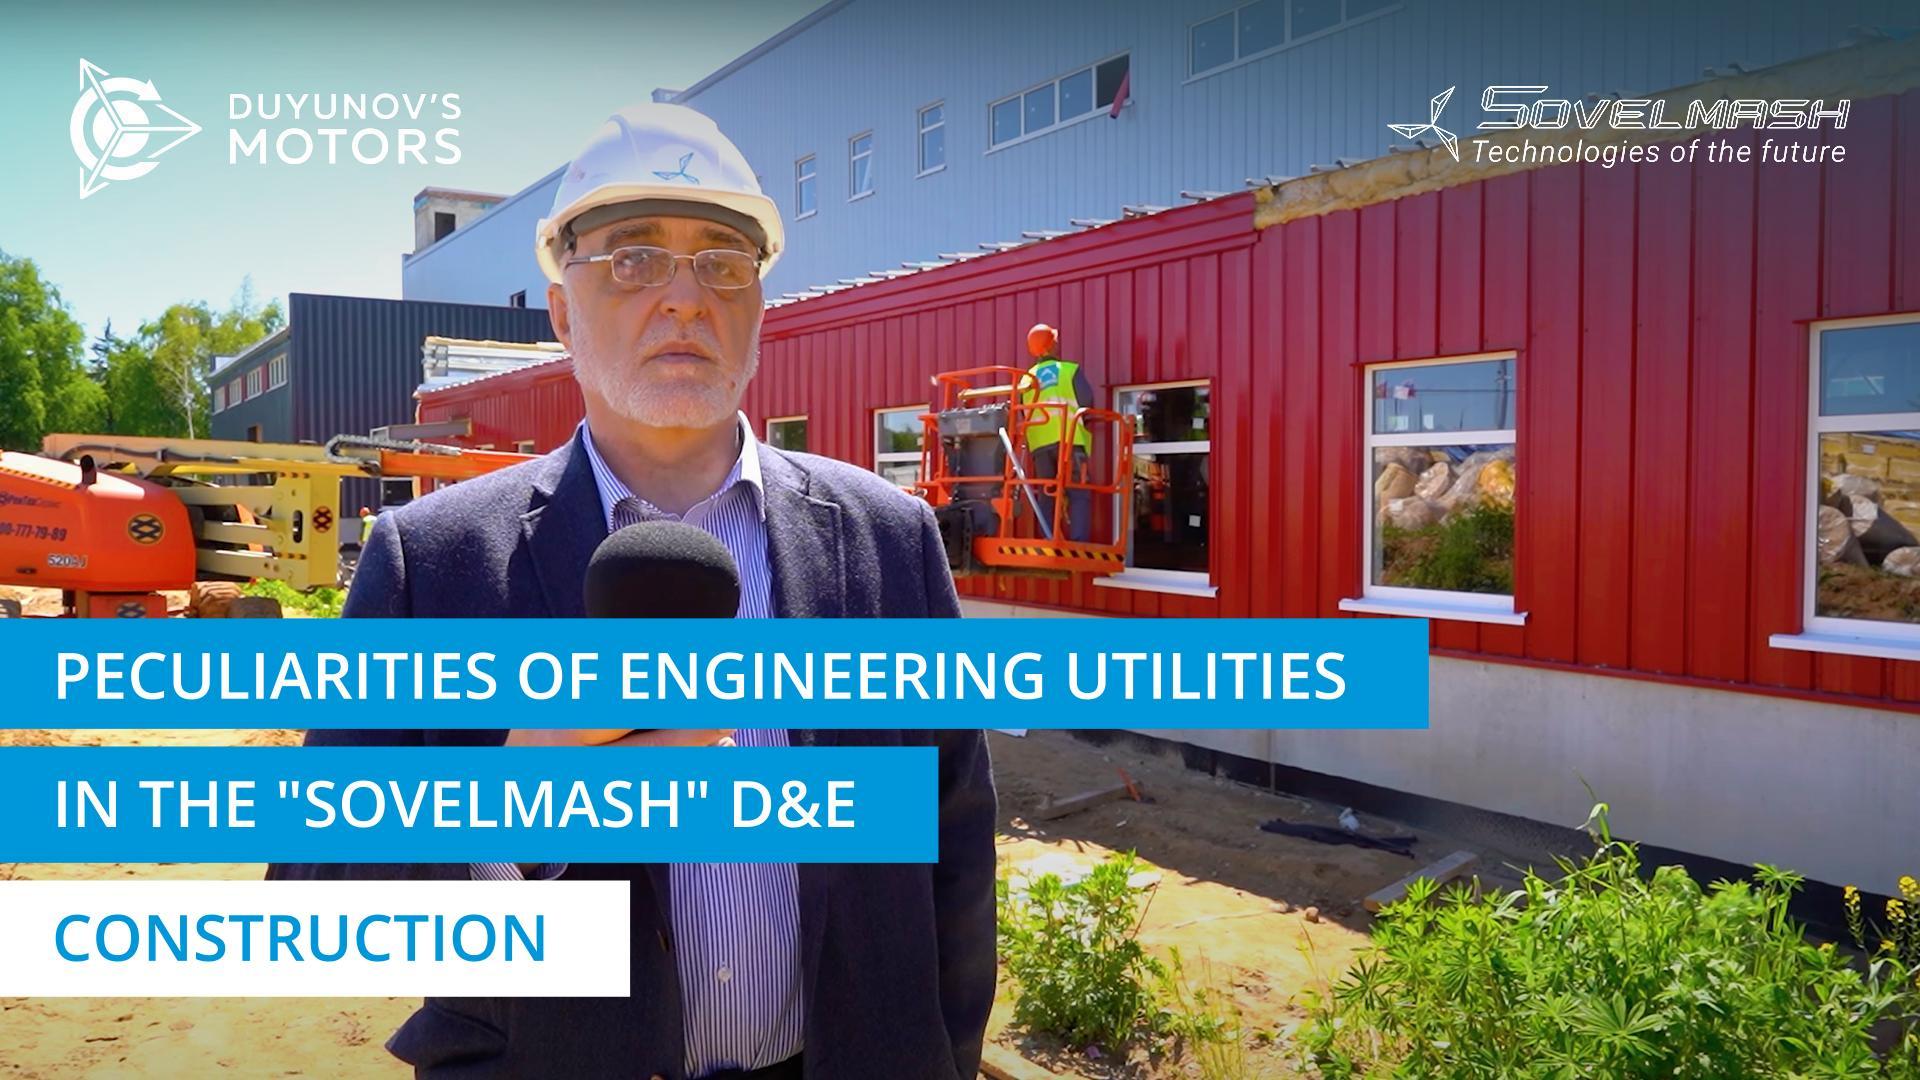 Peculiarities of engineering utilities in the "Sovelmash" D&E construction